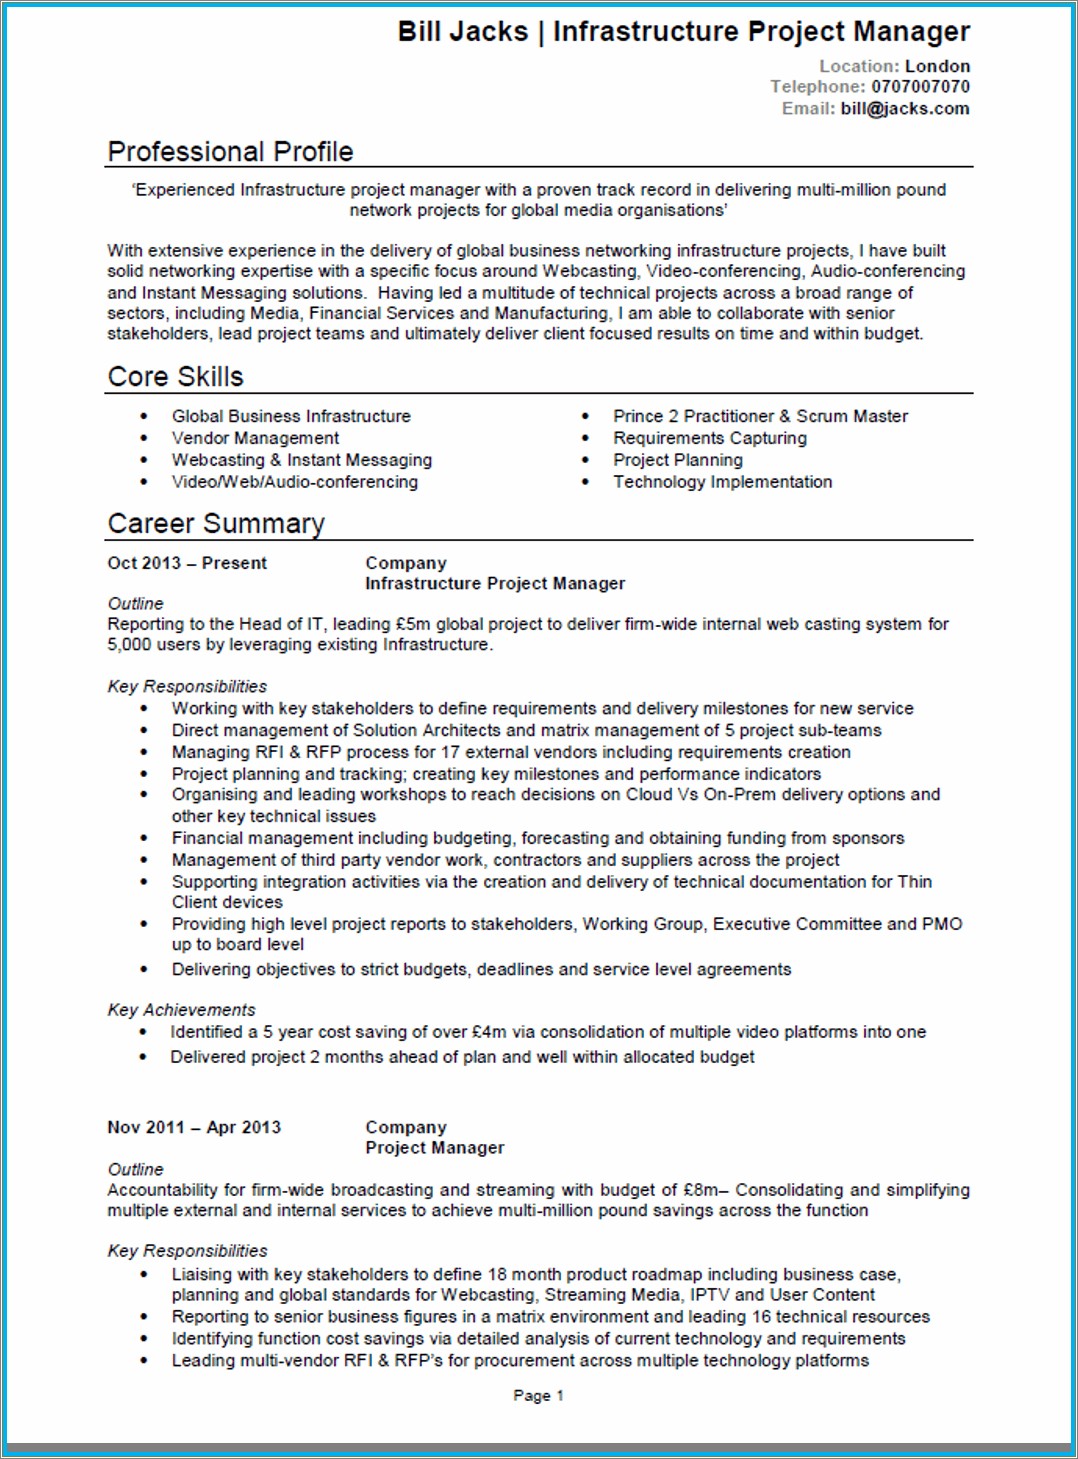 Roles And Responsibilities Of Project Manager For Resume